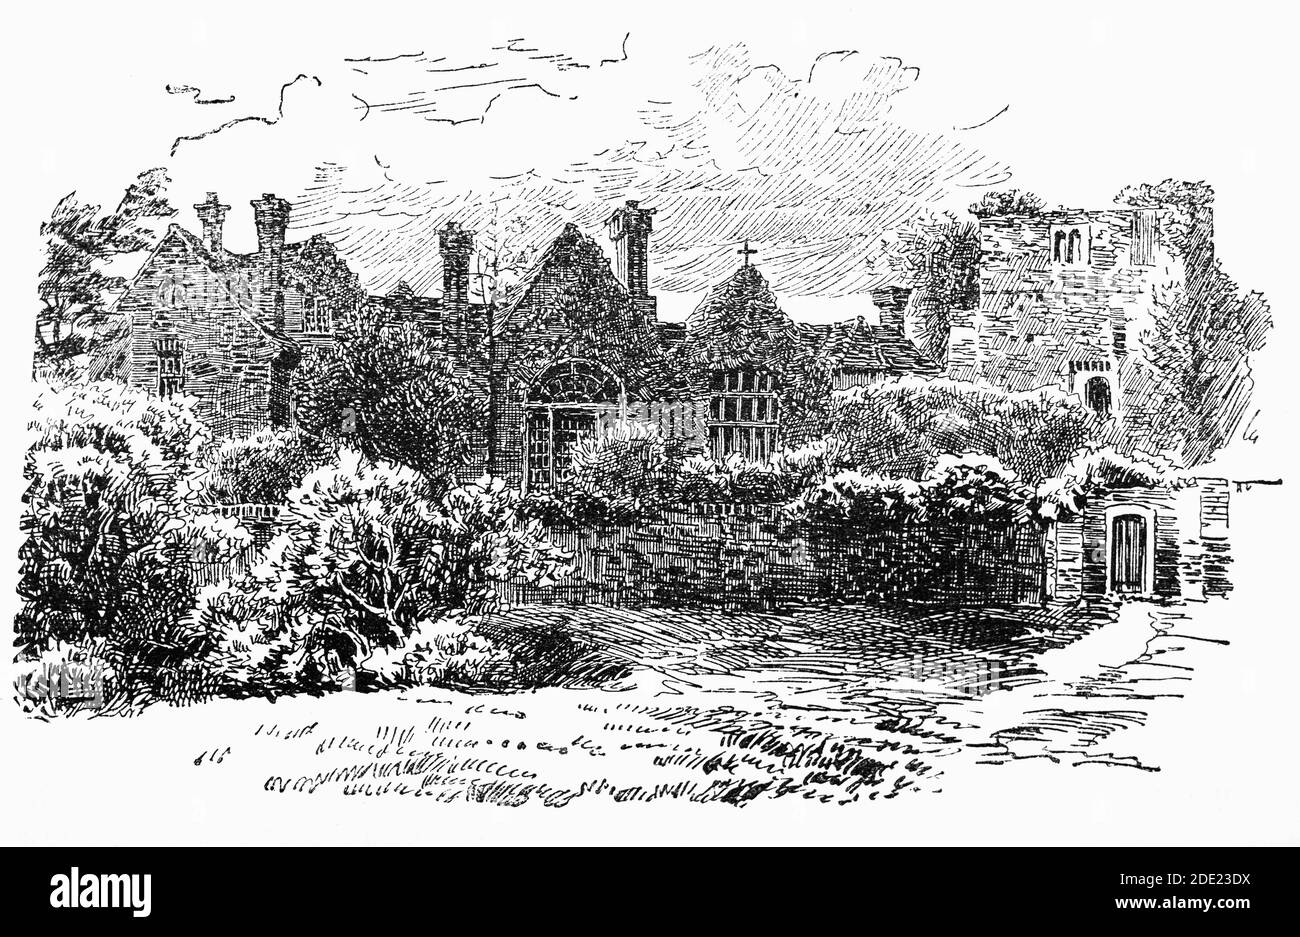 A 19th Century view of the chapel at 12th century Farnham Castle, in Farnham, Surrey, England, which housed the Episcopal Palace of the Bishop of Winchester within the precincts of the fortress. Built in 1138 by Henri de Blois, Bishop of Winchester, grandson of William the Conqueror, Farnham castle became the home of the Bishops of Winchester for over 800 years. In the early 15th century, it was the residence of Cardinal Henry Beaufort who presided at the trial of Joan of Arc in 1431. Stock Photo